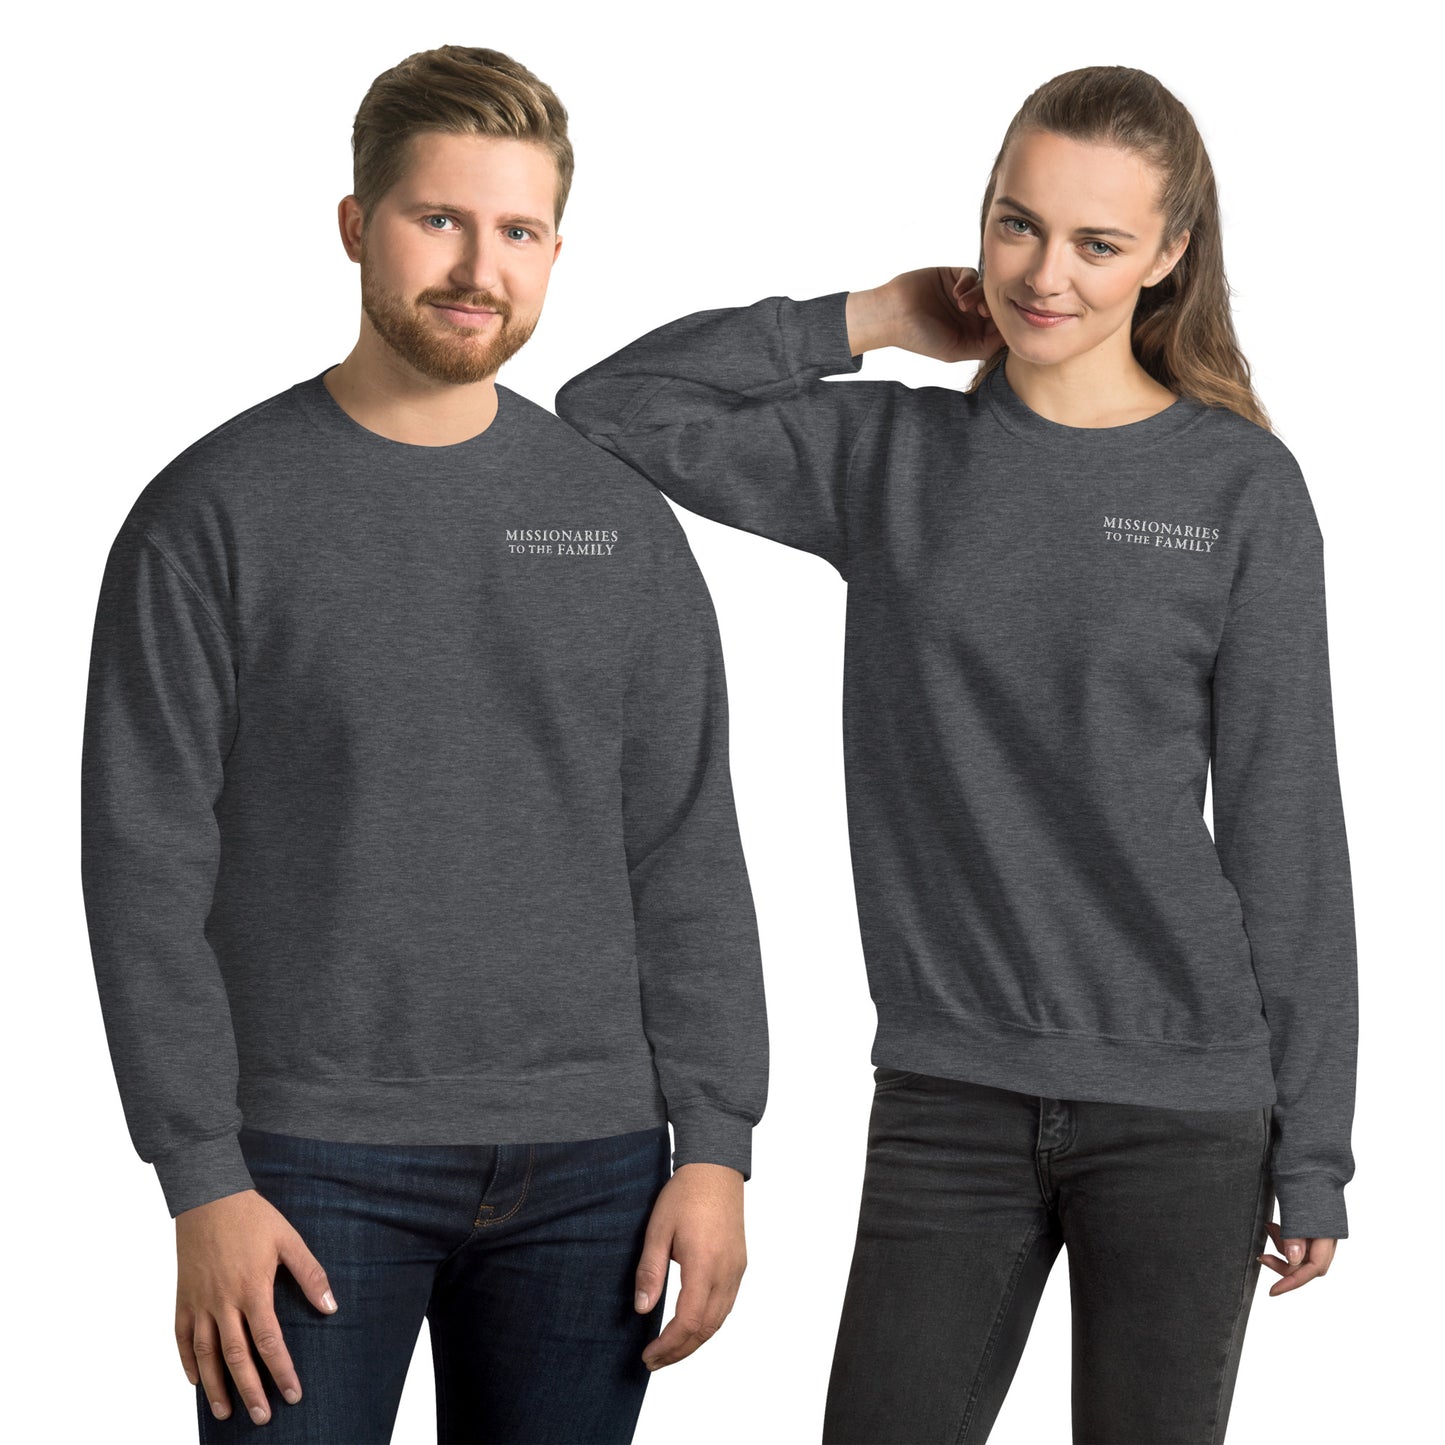 Missionaries to the Family Embroidered Unisex Sweatshirt